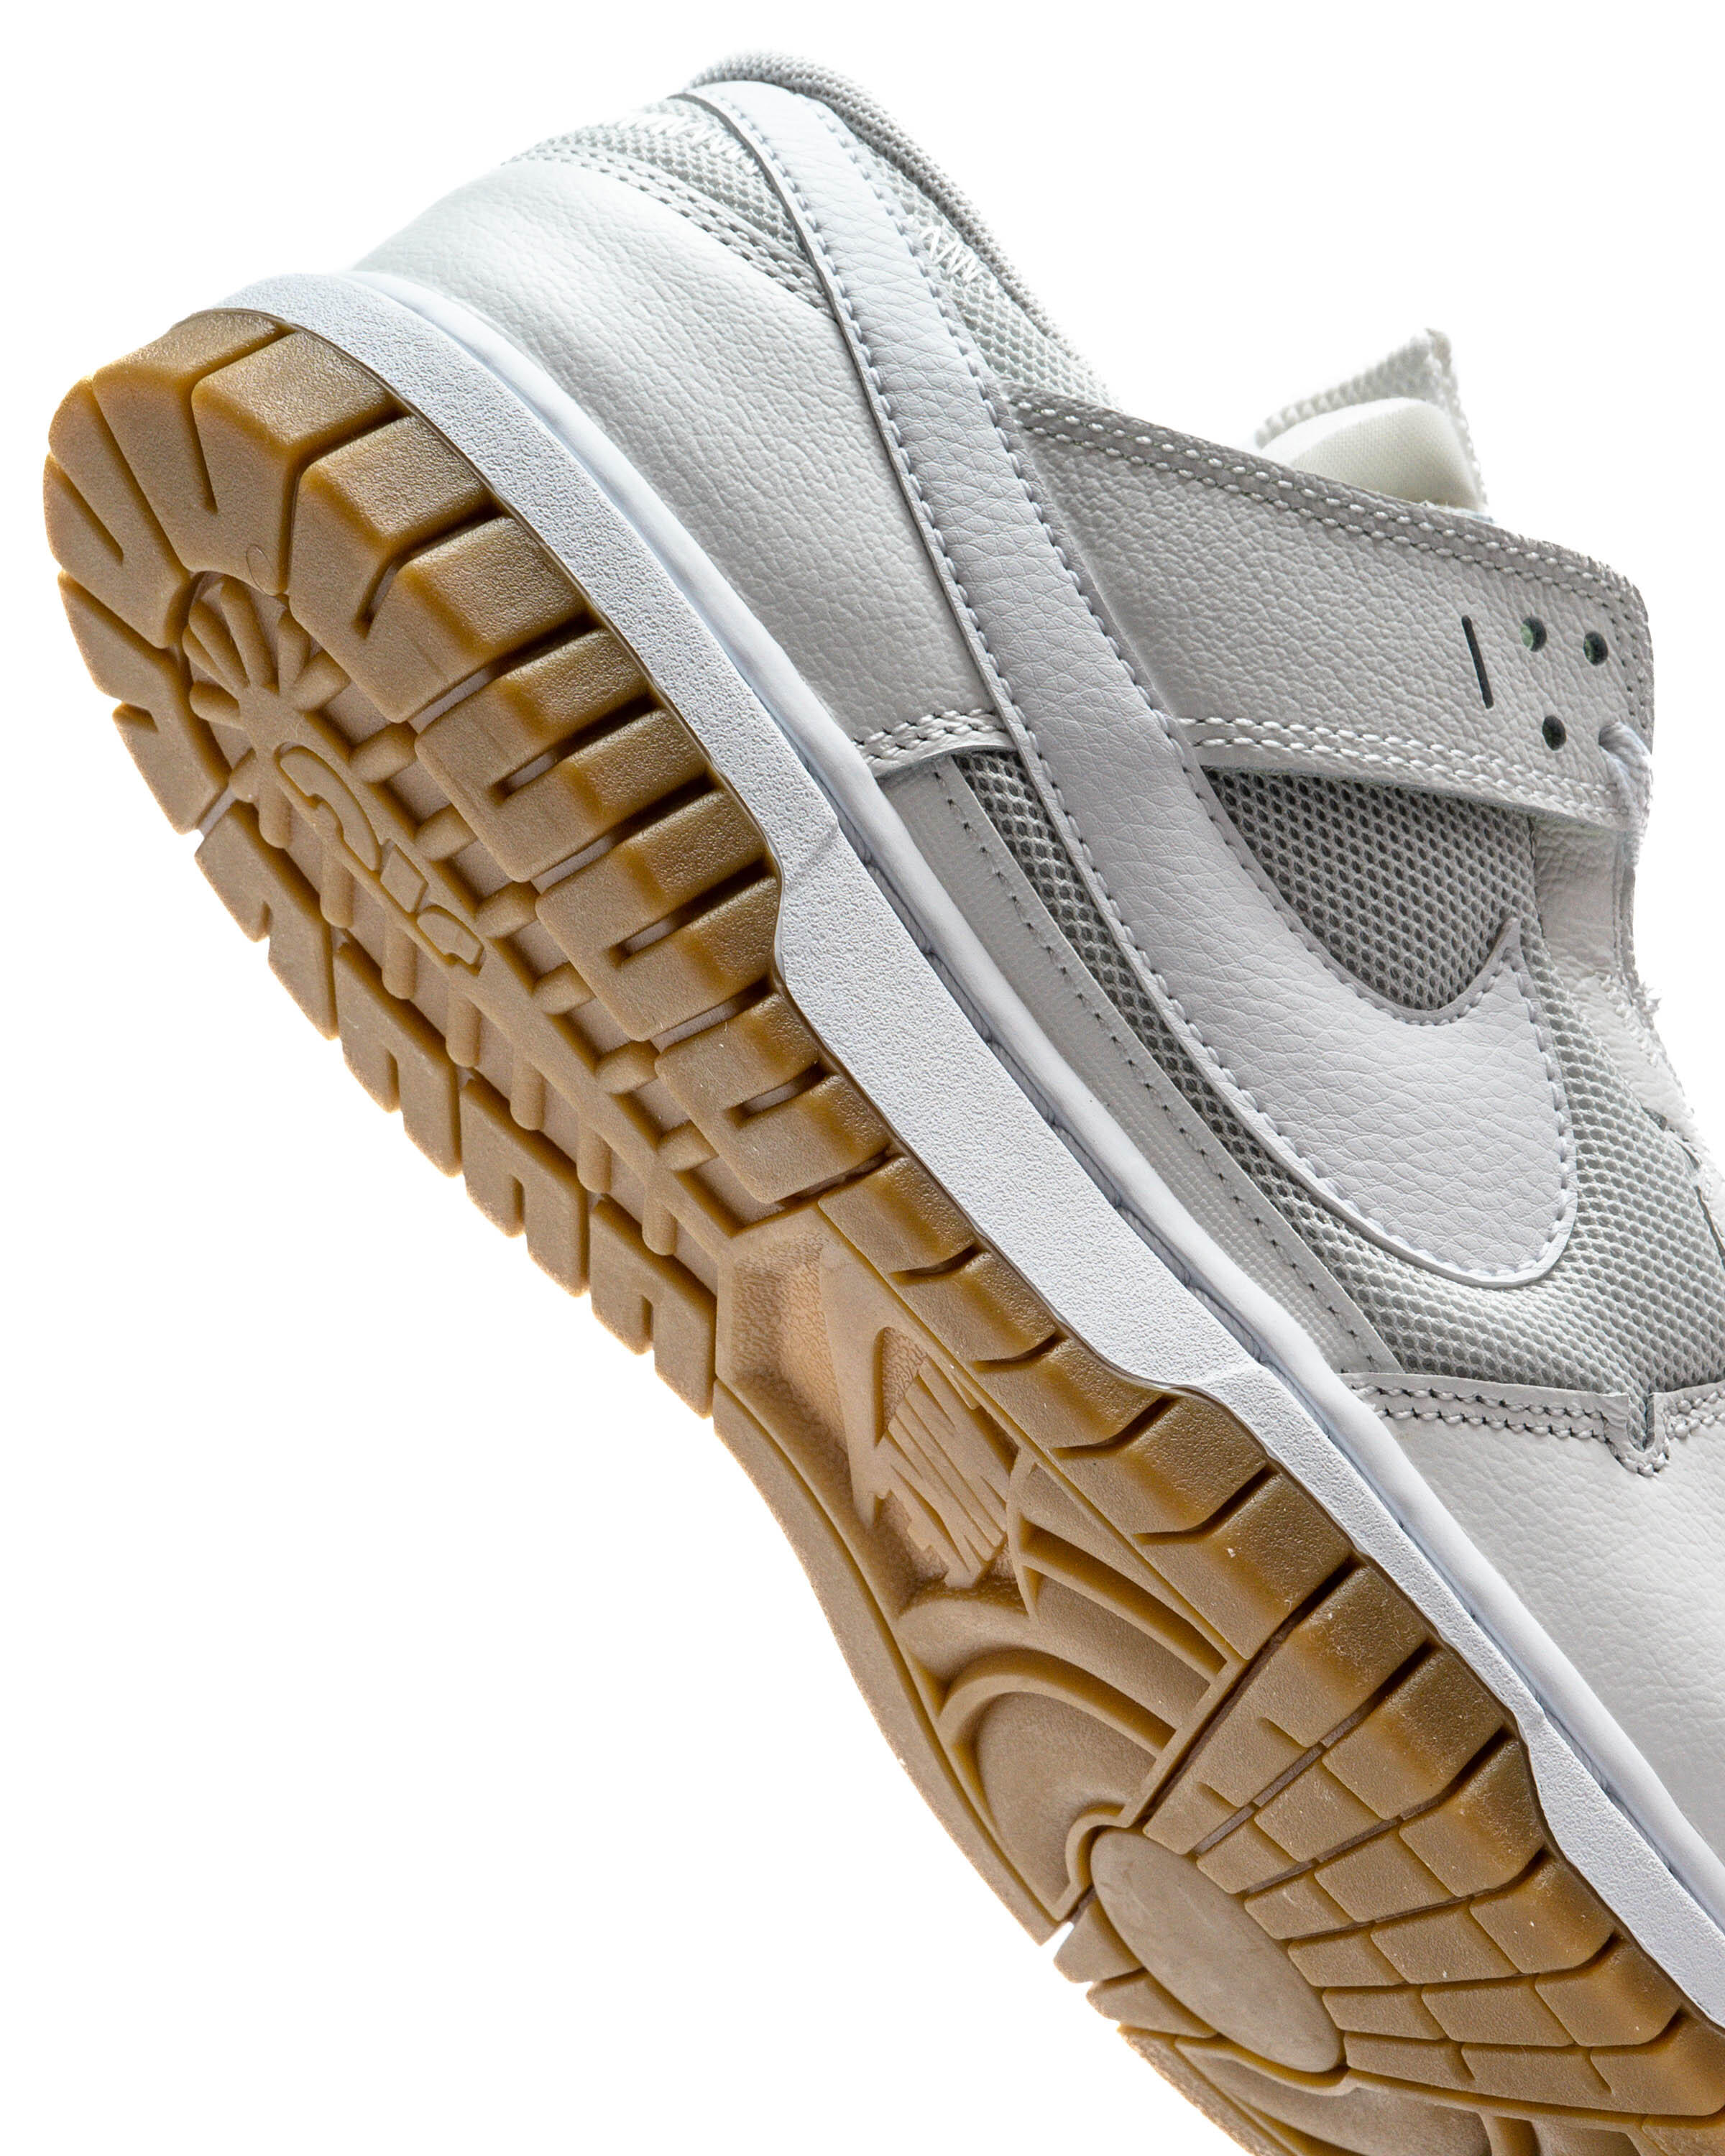 Nike Dunk Low Remastered 'White Gum'